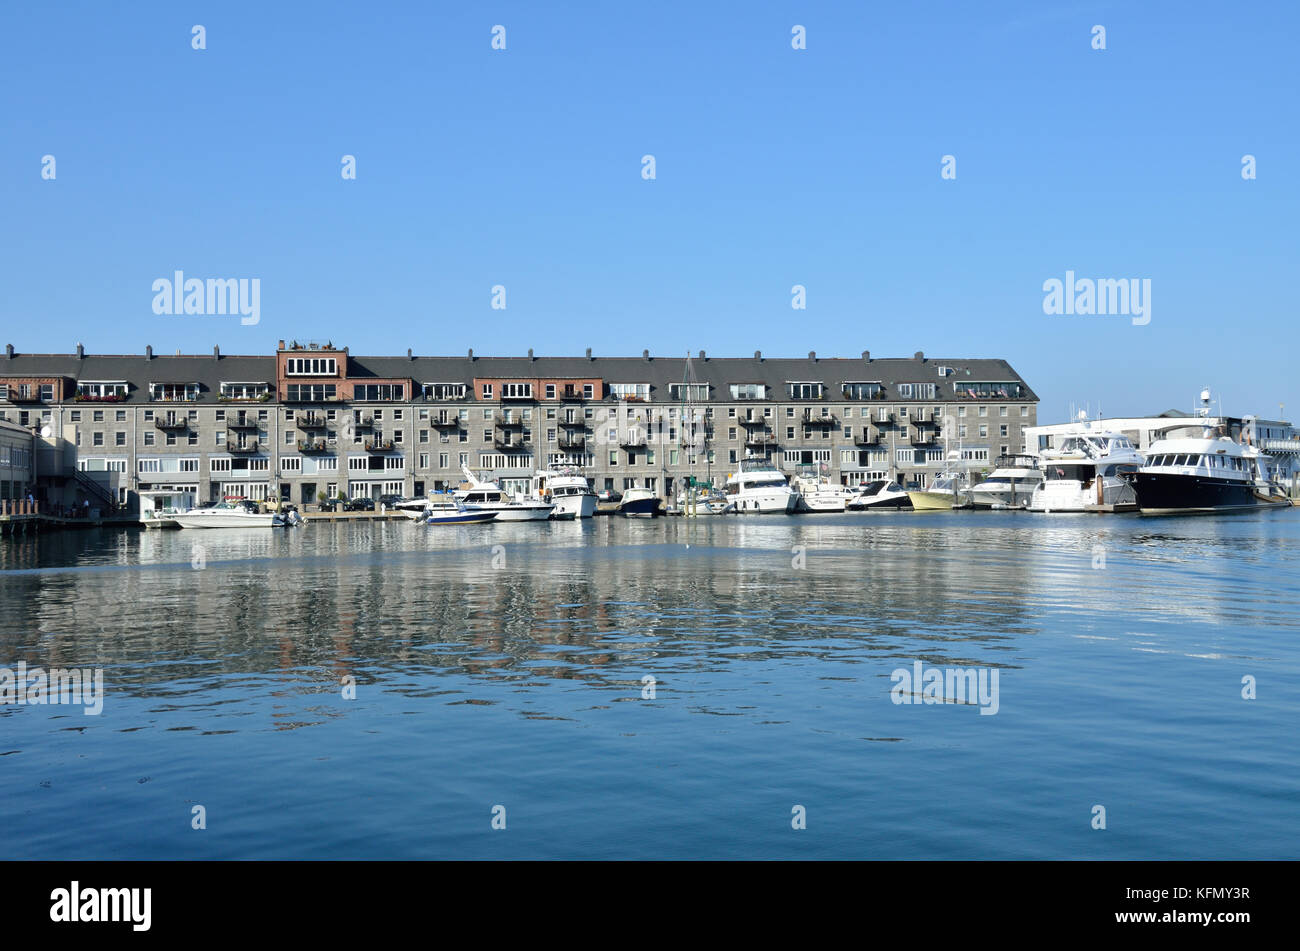 Lewis Wharf with boats 7 condominiums in Boston's North End waterfront Stock Photo